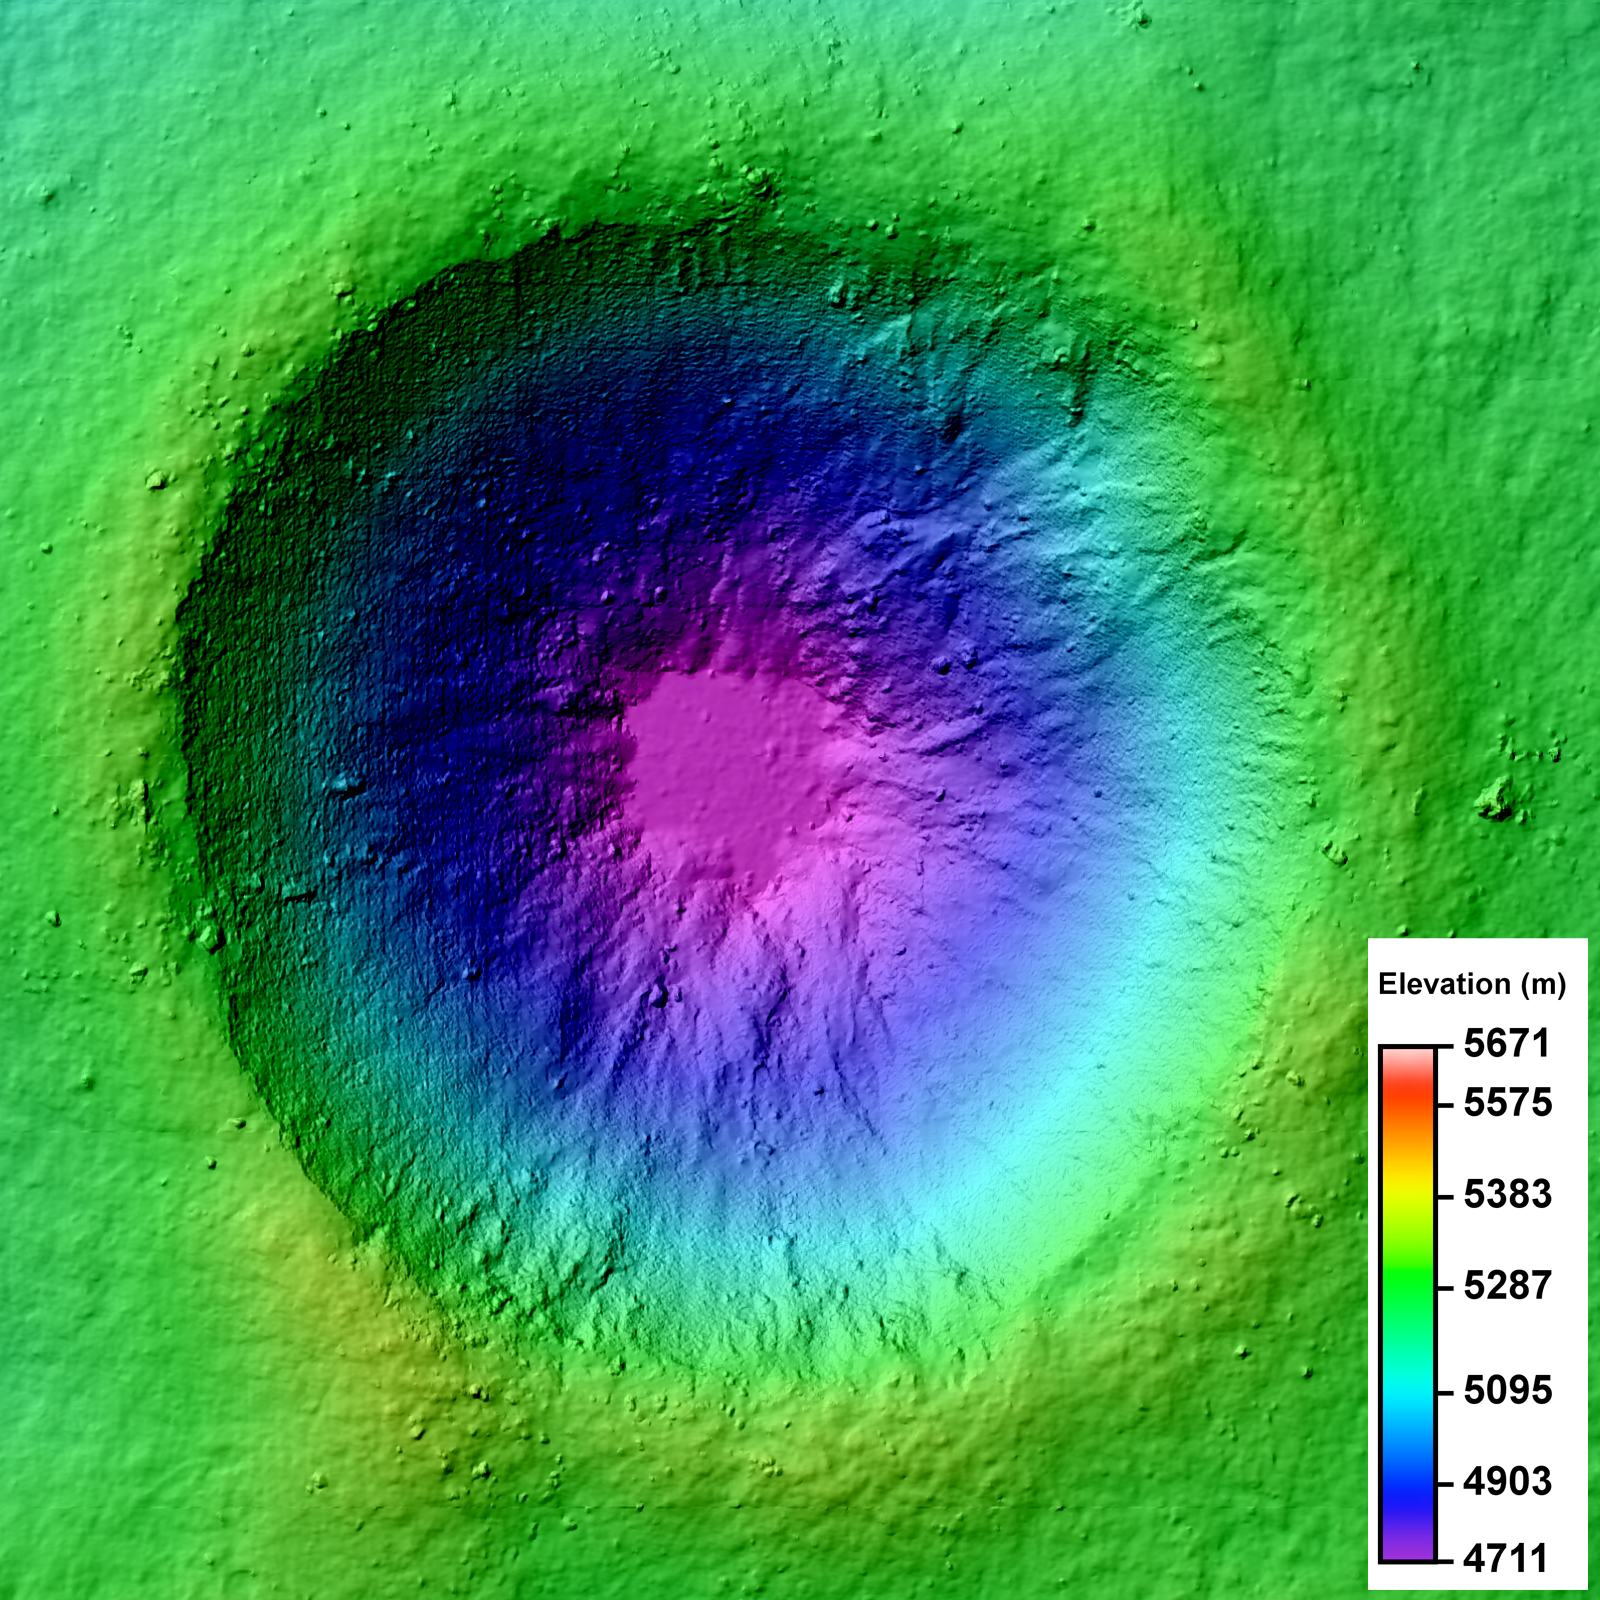 Crater in 3D!